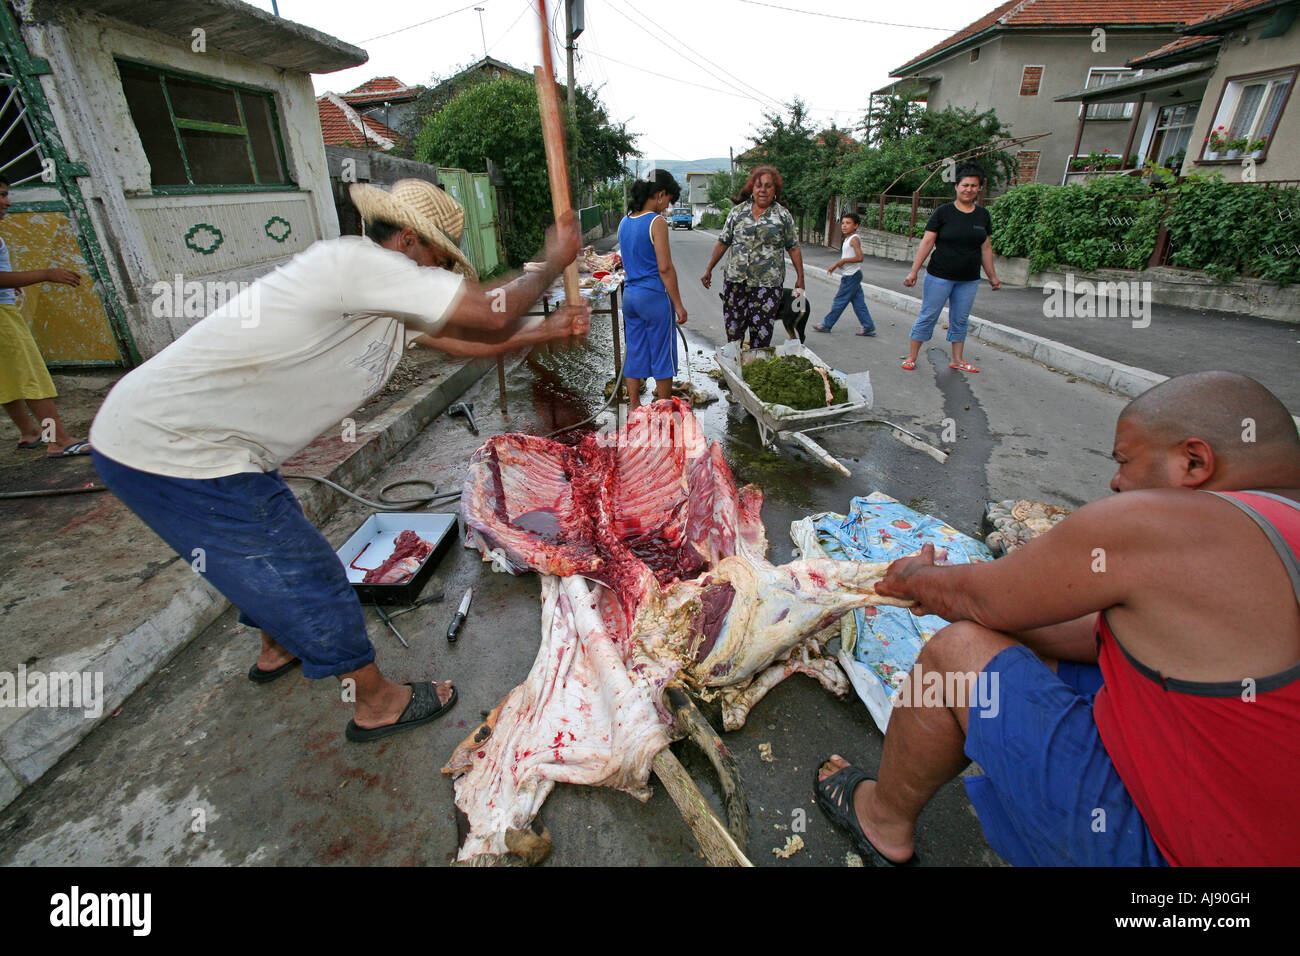 Slaughtering a cow on the street Stock Photo